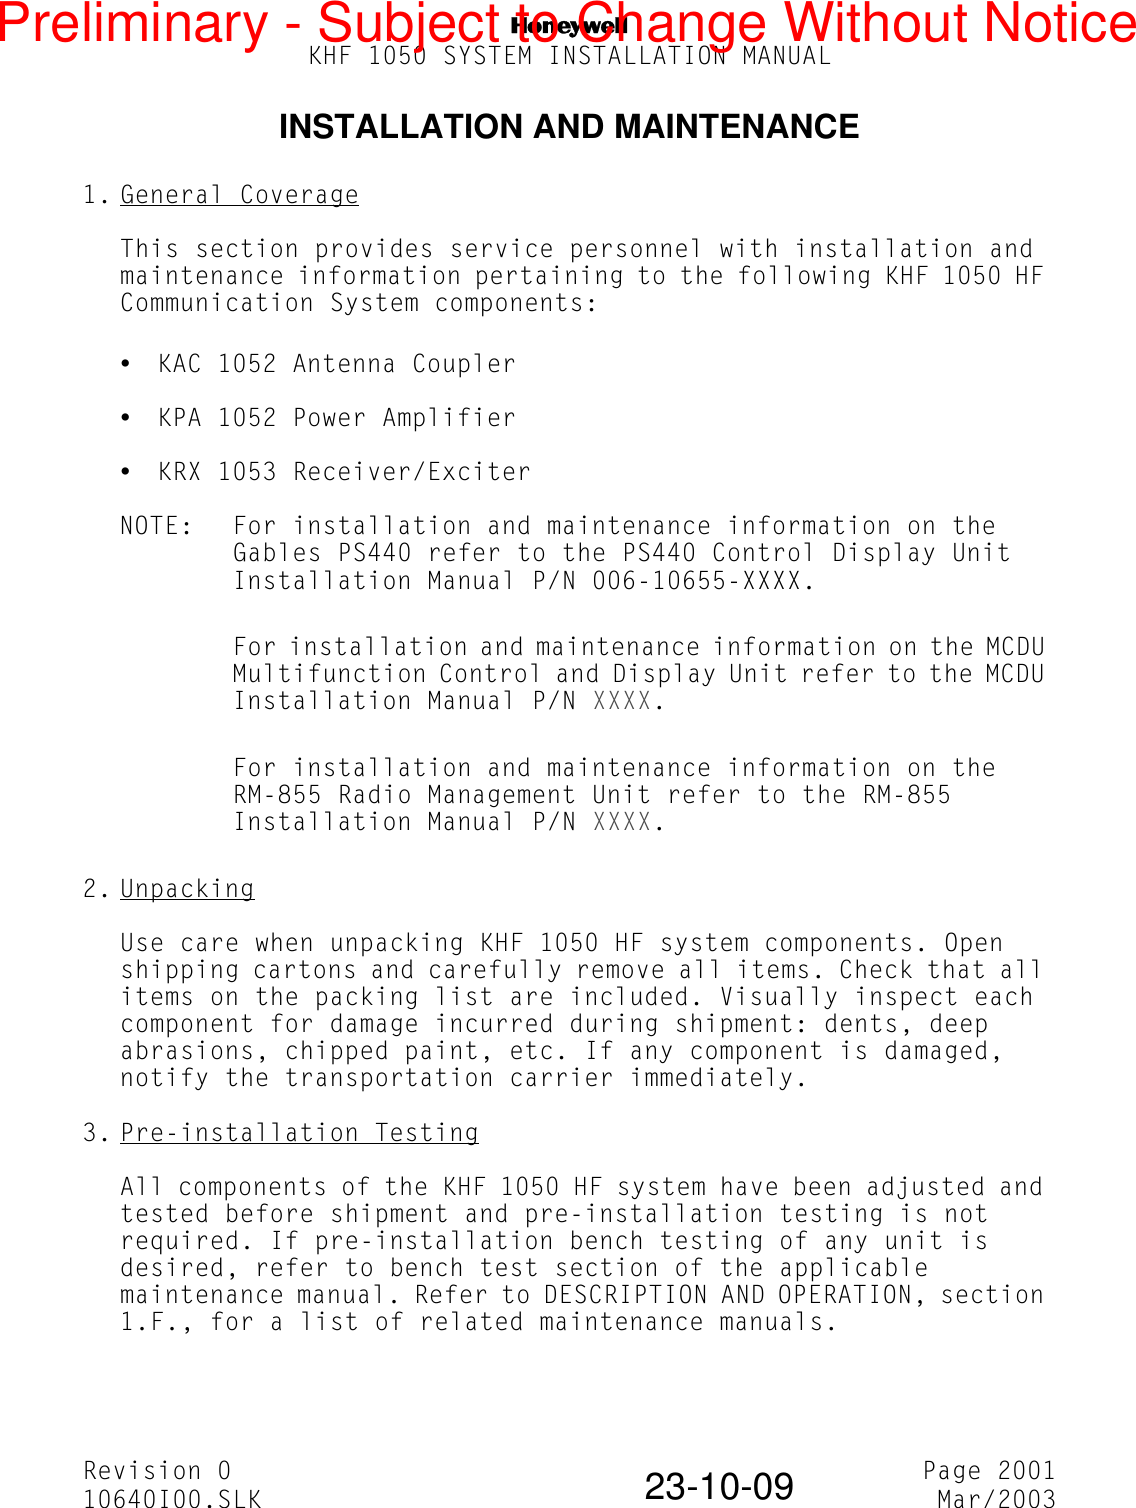 NKHF 1050 SYSTEM INSTALLATION MANUALRevision 0 Page 200110640I00.SLK Mar/200323-10-09INSTALLATION AND MAINTENANCE1. General CoverageThis section provides service personnel with installation and maintenance information pertaining to the following KHF 1050 HF Communication System components:yKAC 1052 Antenna CoupleryKPA 1052 Power AmplifieryKRX 1053 Receiver/ExciterNOTE: For installation and maintenance information on the Gables PS440 refer to the PS440 Control Display Unit Installation Manual P/N 006-10655-XXXX.For installation and maintenance information on the MCDU Multifunction Control and Display Unit refer to the MCDU Installation Manual P/N XXXX.For installation and maintenance information on the RM-855 Radio Management Unit refer to the RM-855 Installation Manual P/N XXXX.2. UnpackingUse care when unpacking KHF 1050 HF system components. Open shipping cartons and carefully remove all items. Check that all items on the packing list are included. Visually inspect each component for damage incurred during shipment: dents, deep abrasions, chipped paint, etc. If any component is damaged, notify the transportation carrier immediately.3. Pre-installation TestingAll components of the KHF 1050 HF system have been adjusted and tested before shipment and pre-installation testing is not required. If pre-installation bench testing of any unit is desired, refer to bench test section of the applicable maintenance manual. Refer to DESCRIPTION AND OPERATION, section 1.F., for a list of related maintenance manuals.Preliminary - Subject to Change Without Notice